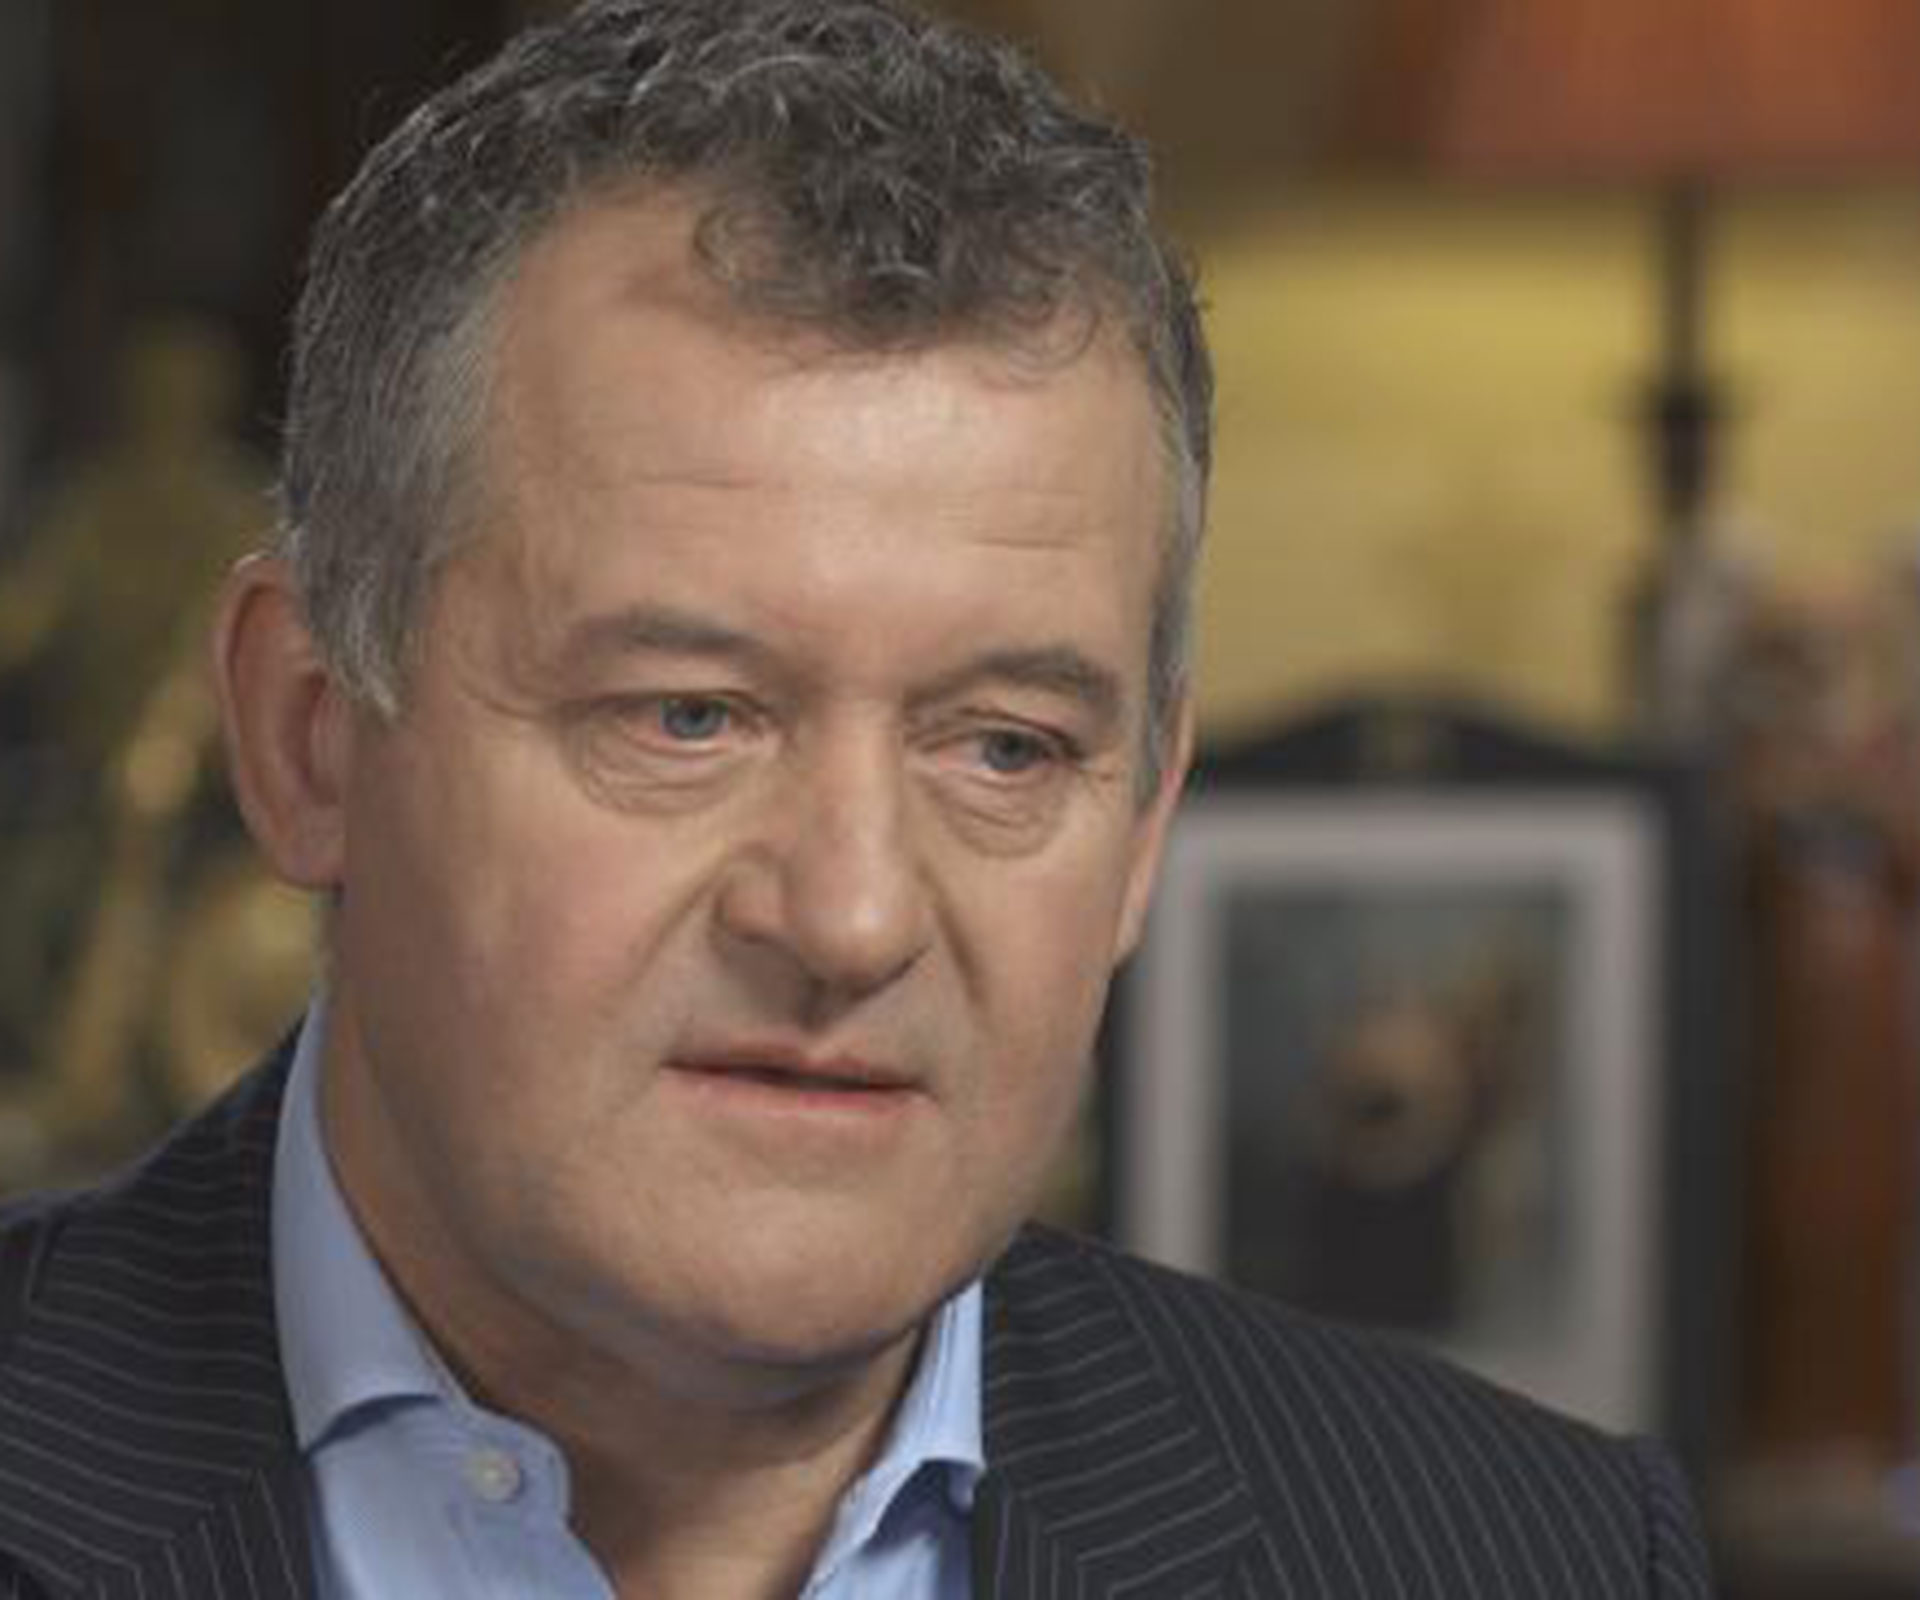 Paul Burrell reveals letters from Princess Diana “prophesied her own death”